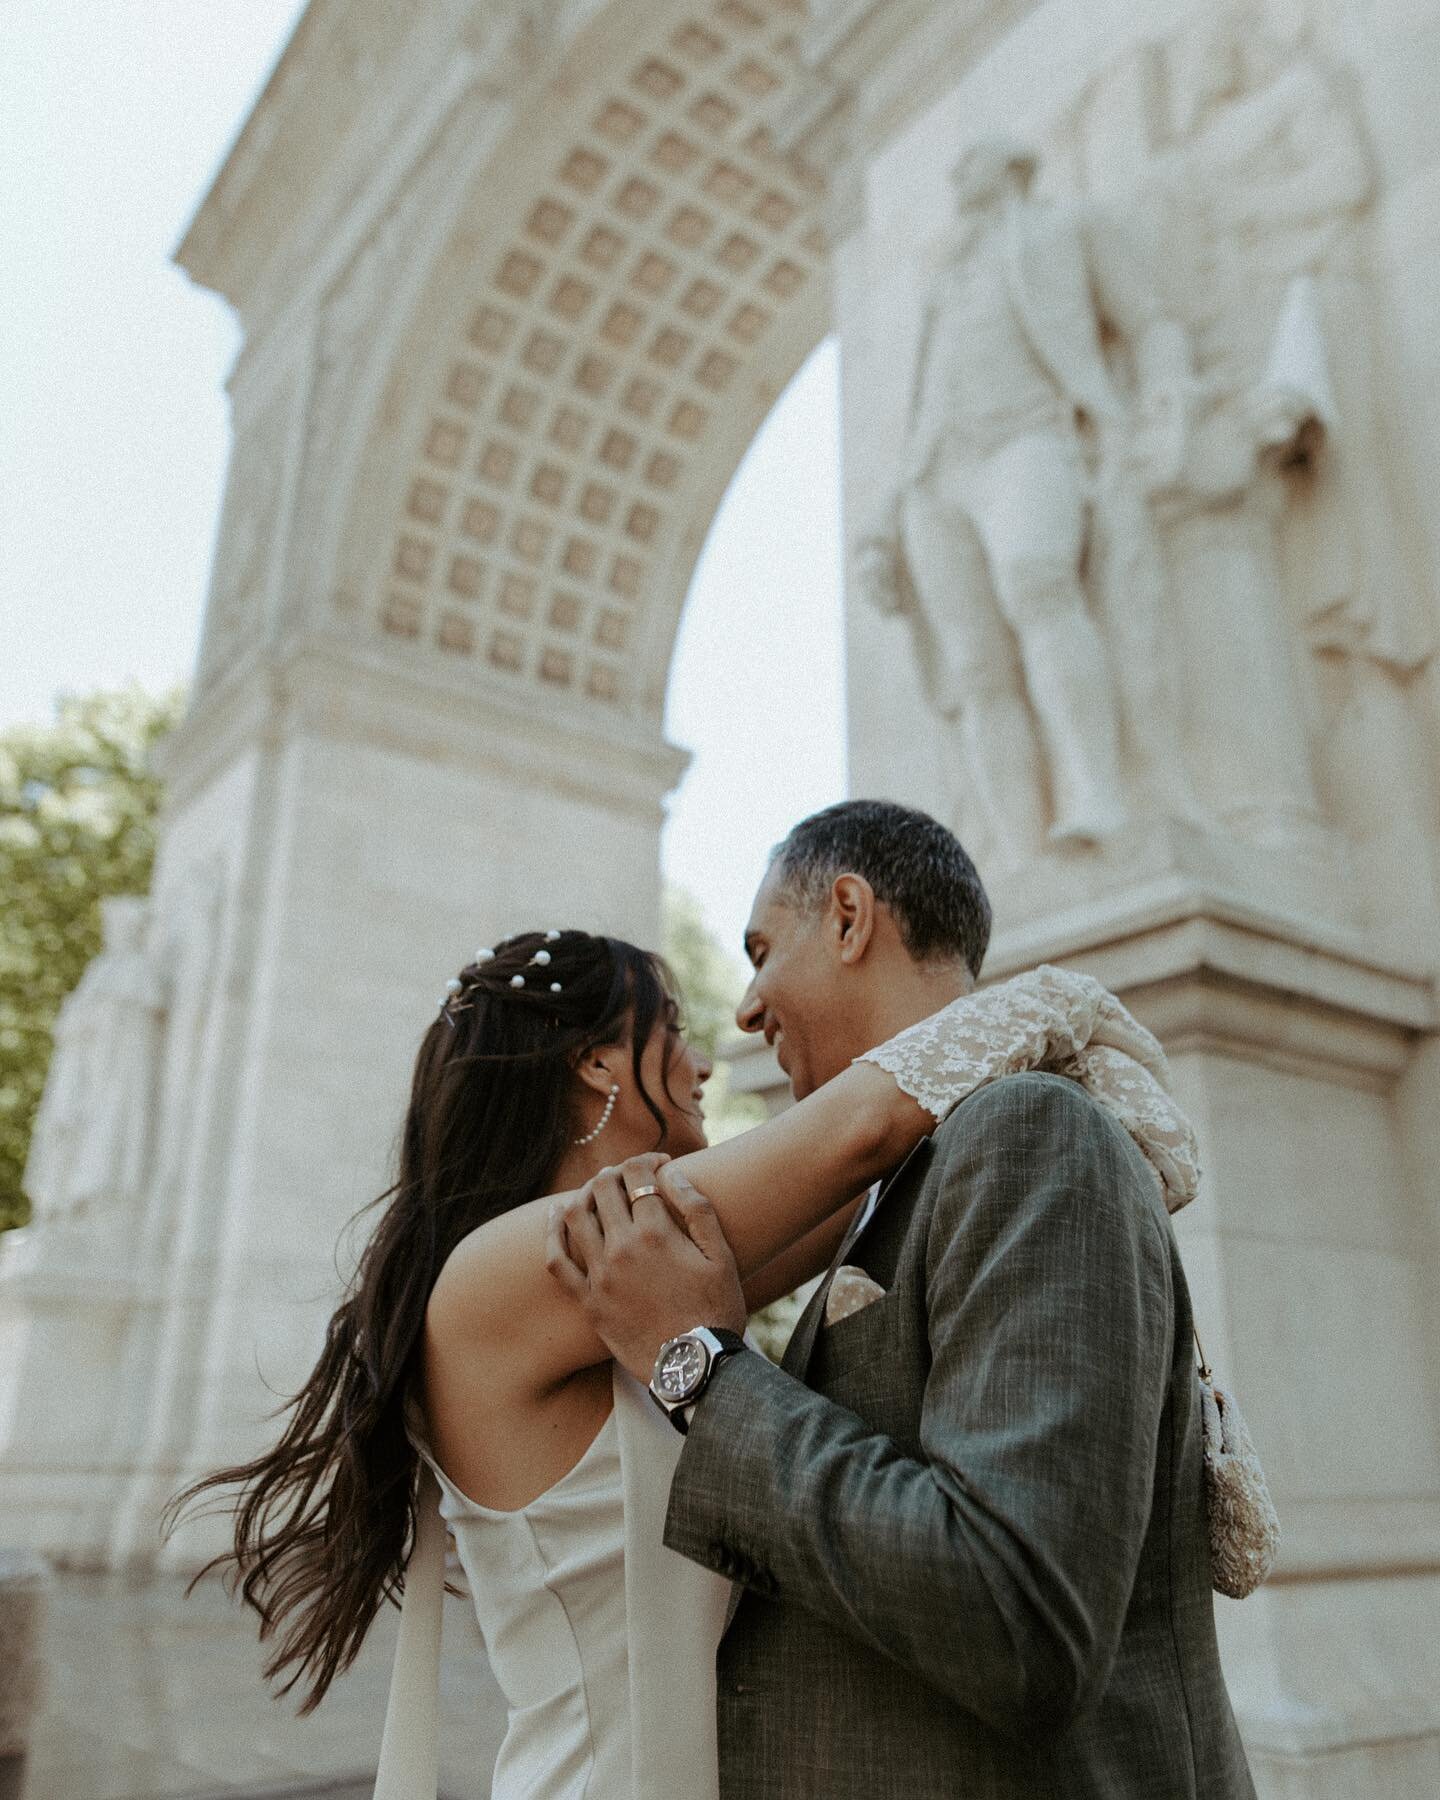 Celebrated their almost-wedding day with a walk through Washington Square Park and a couple of pizza slices. I loved my time with Brie + Amit so much and am so glad the rain took a break for 10 minutes so we could take these pictures 🥰